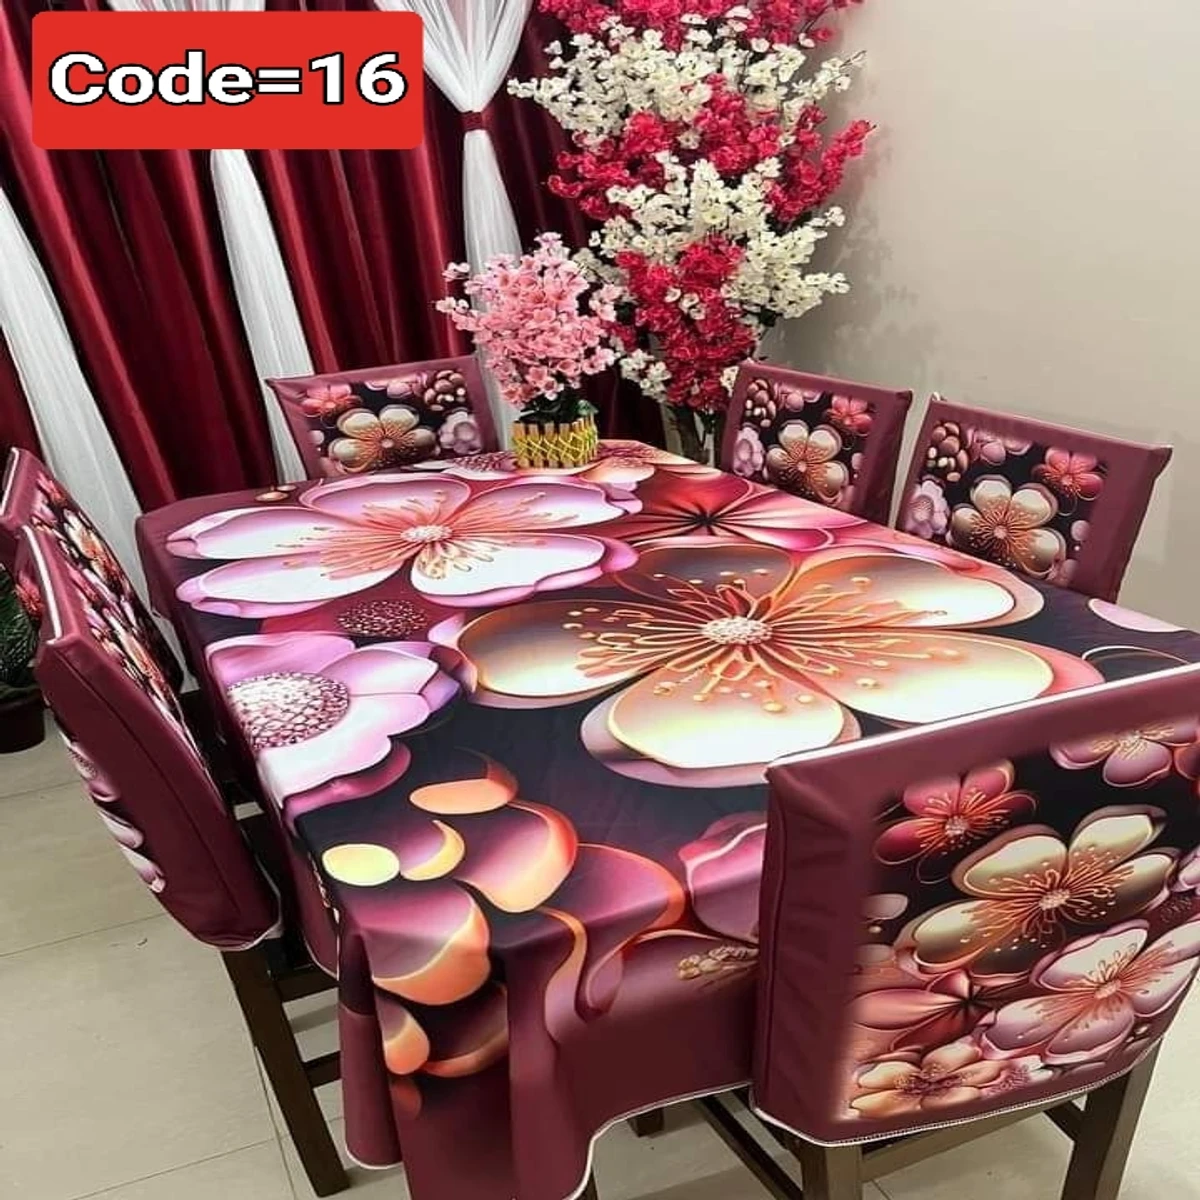 3D Pint Dining Table and Chair Cover Code = 16